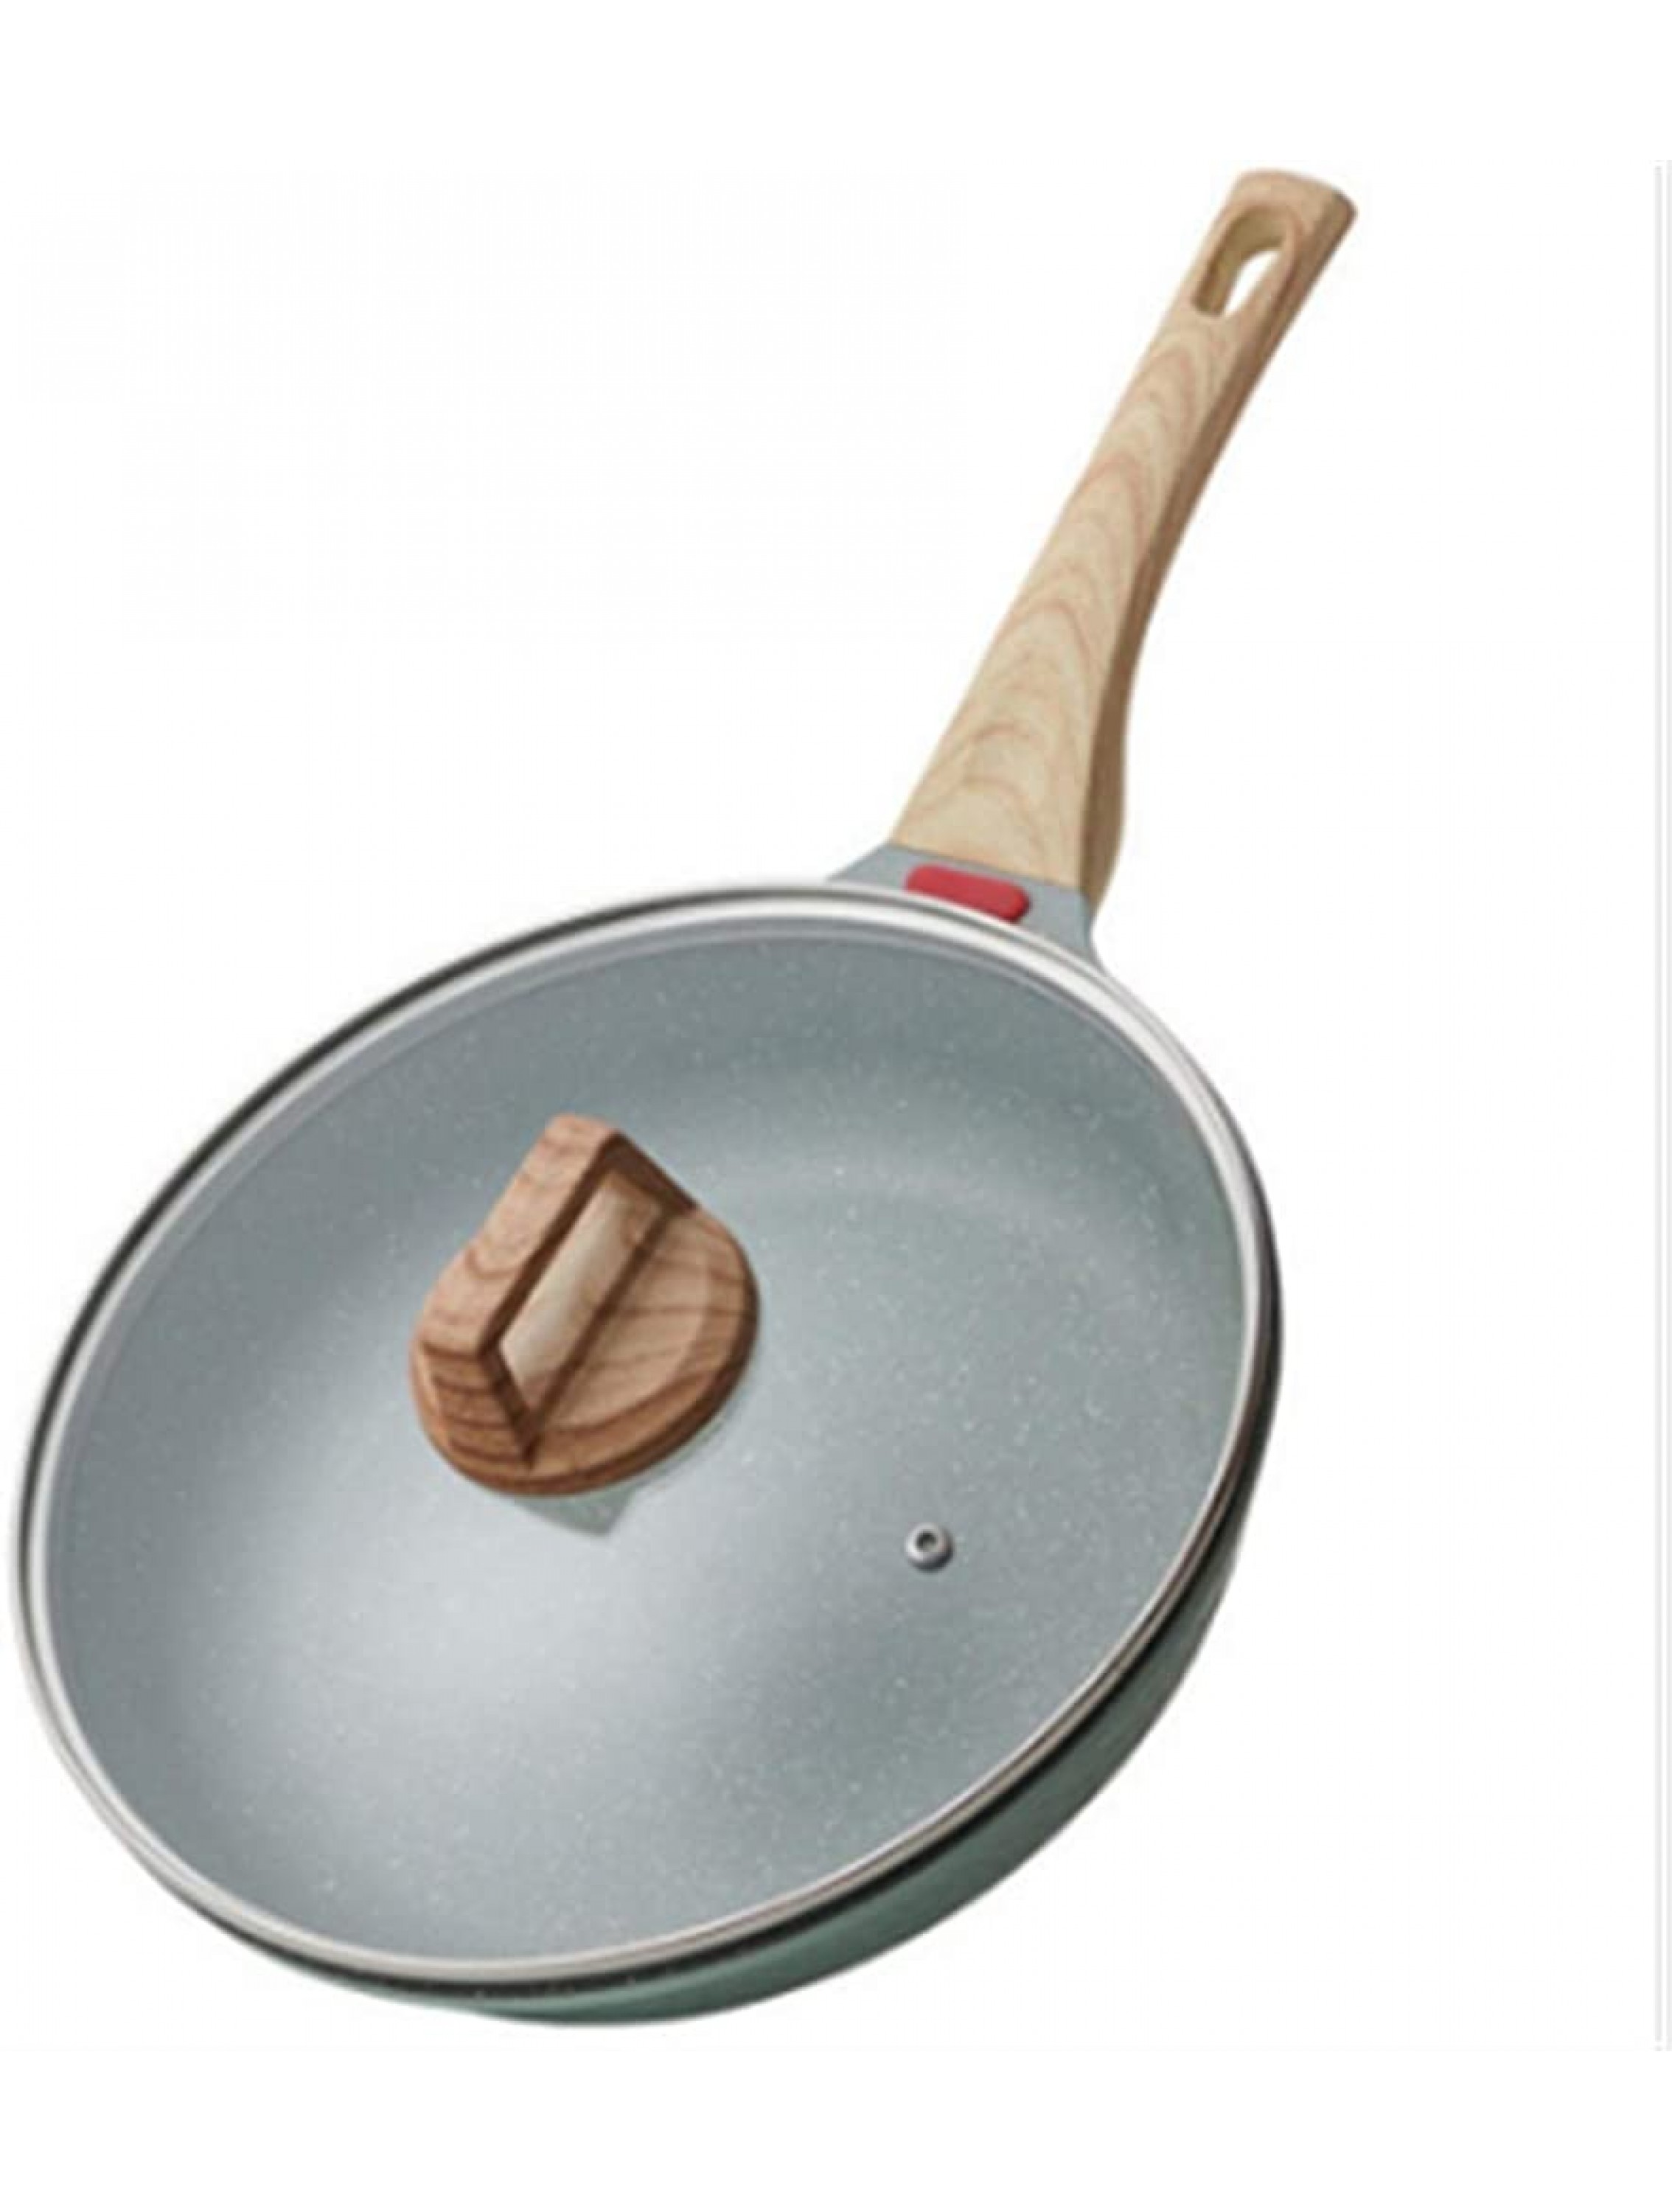 MIAOMSI Safe Saute Pan 20-28CM Maifan Stone Frying Pot Thickened Omelet Pan Non-Stick Egg Pancake Steak Pan with Glass Cover Cooking Breakfast Maker Color : Pan Size : 20cm - BY25T1J5P